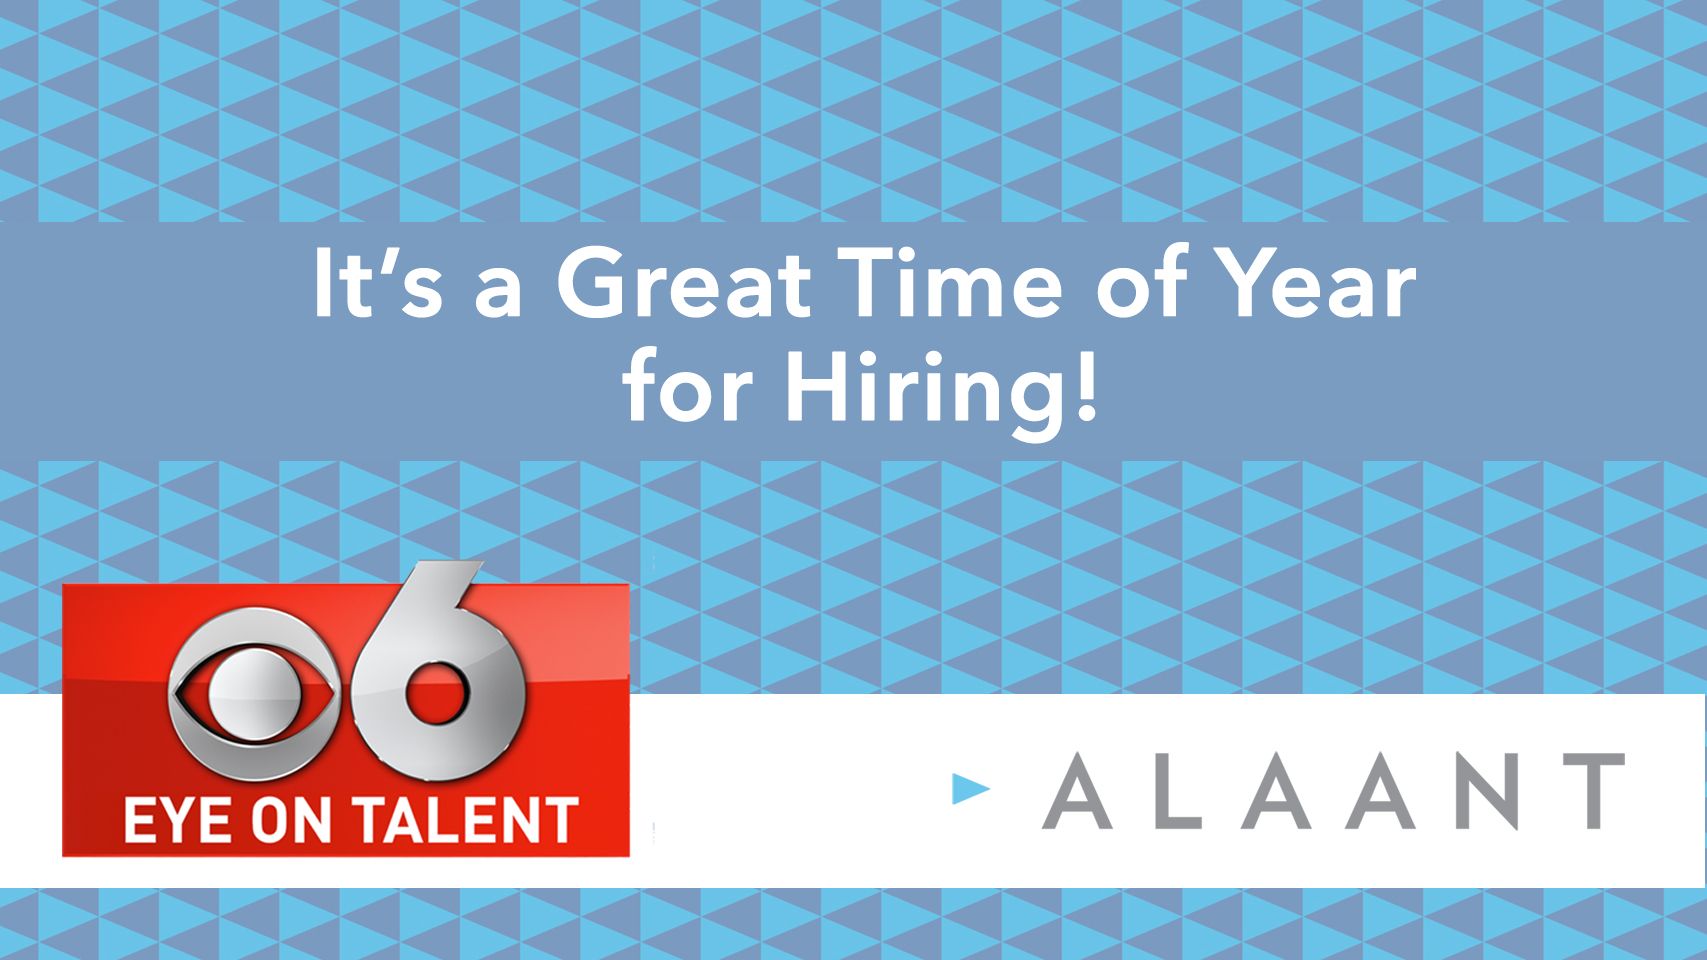 Alaant Eye on Talent It’s a Great Time of Year for Hiring